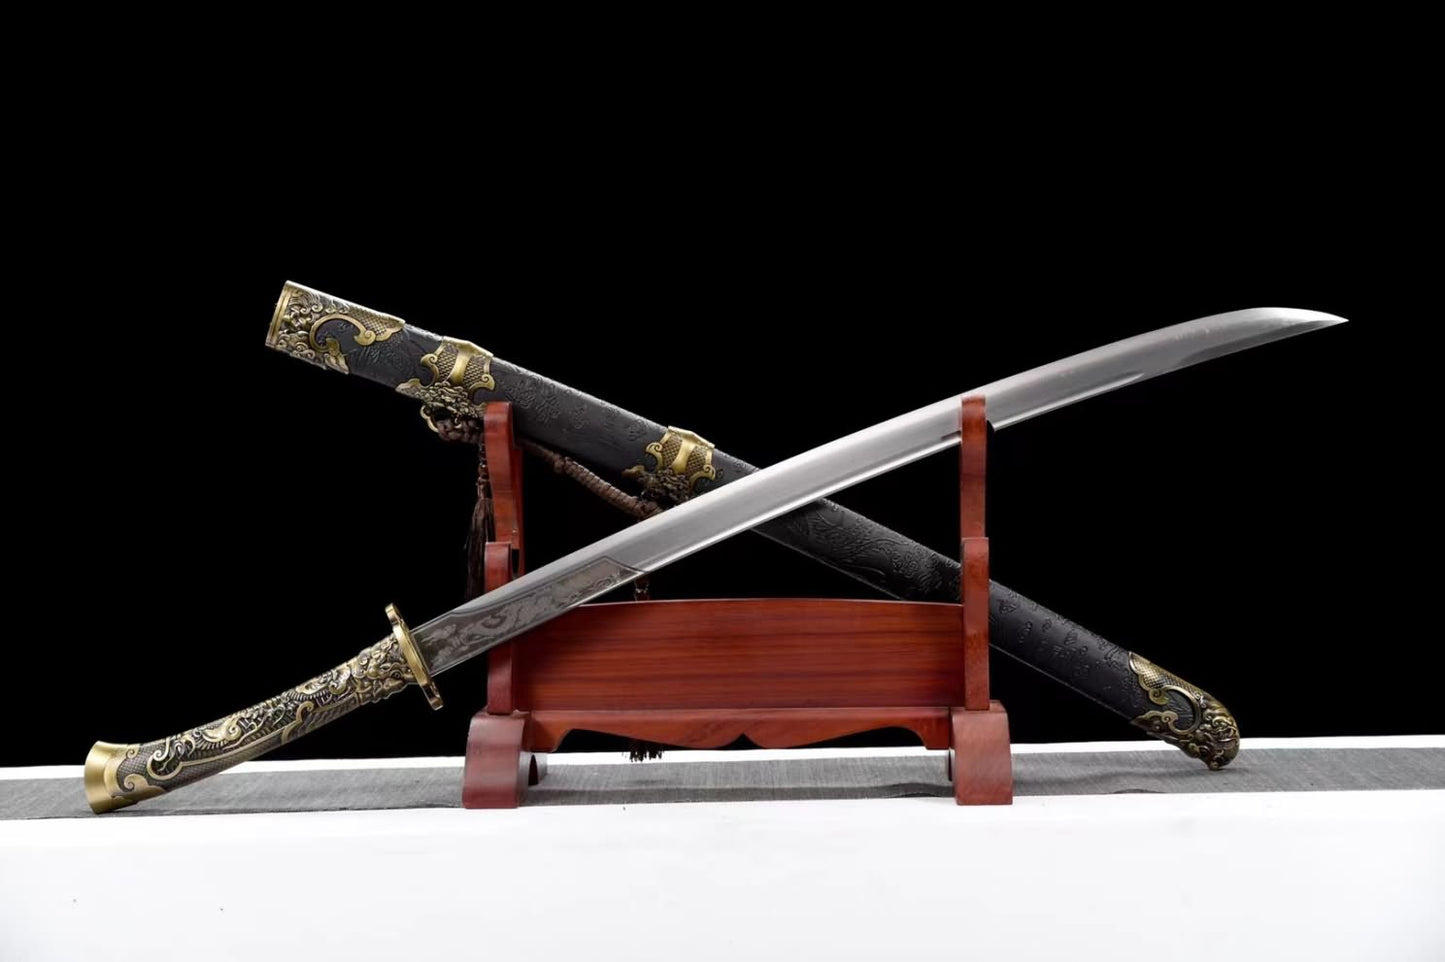 Hand-Forged Chinese Swords - Authentic Dao and Broadsword Craftsmanship | High Carbon Steel Blades with Alloy Handles